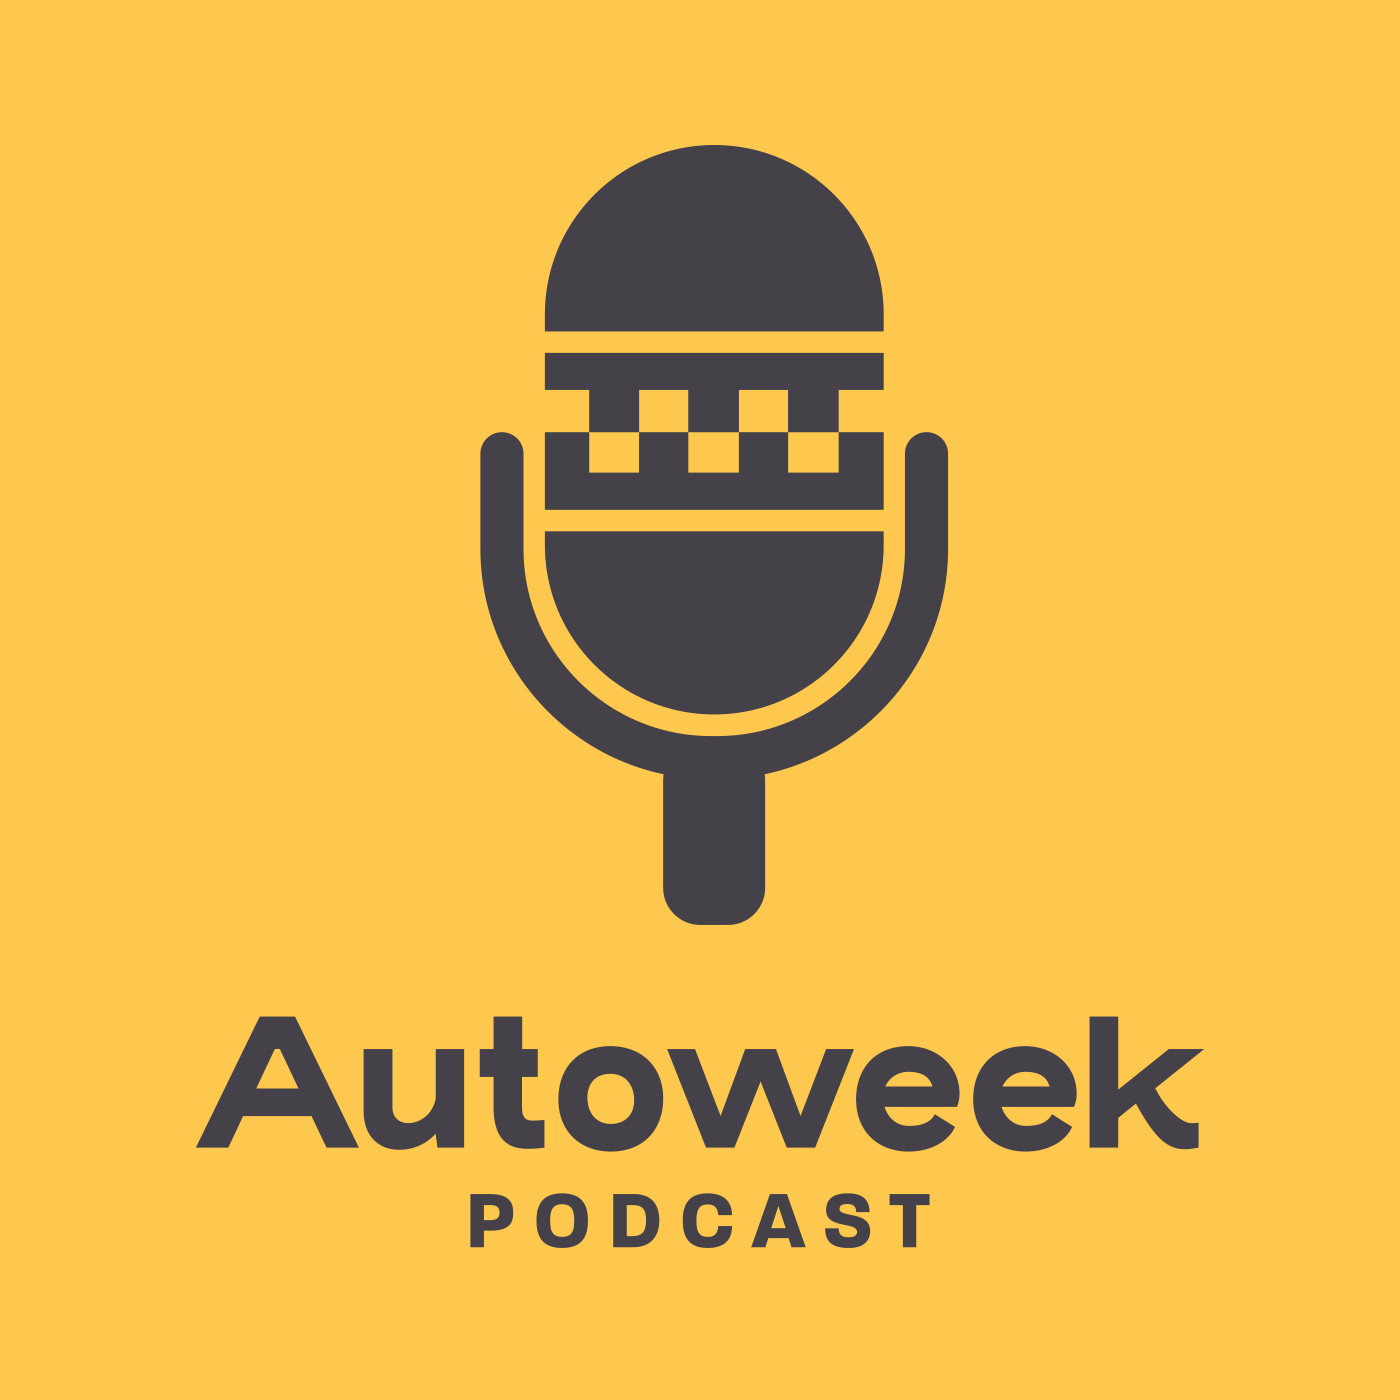 The Autoweek Podcast